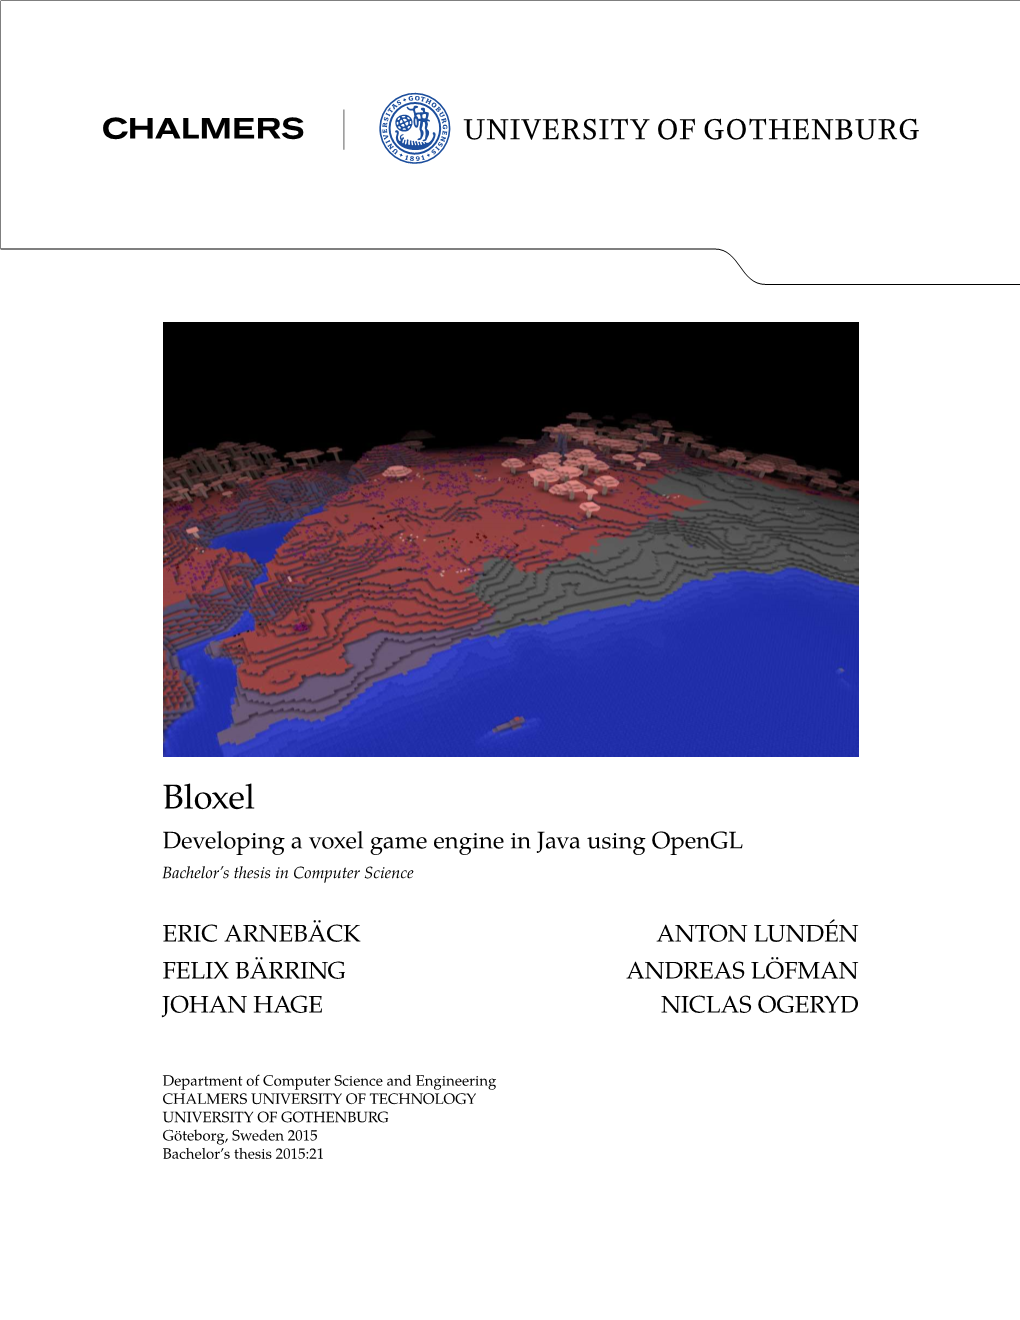 Bloxel Developing a Voxel Game Engine in Java Using Opengl Bachelor’S Thesis in Computer Science